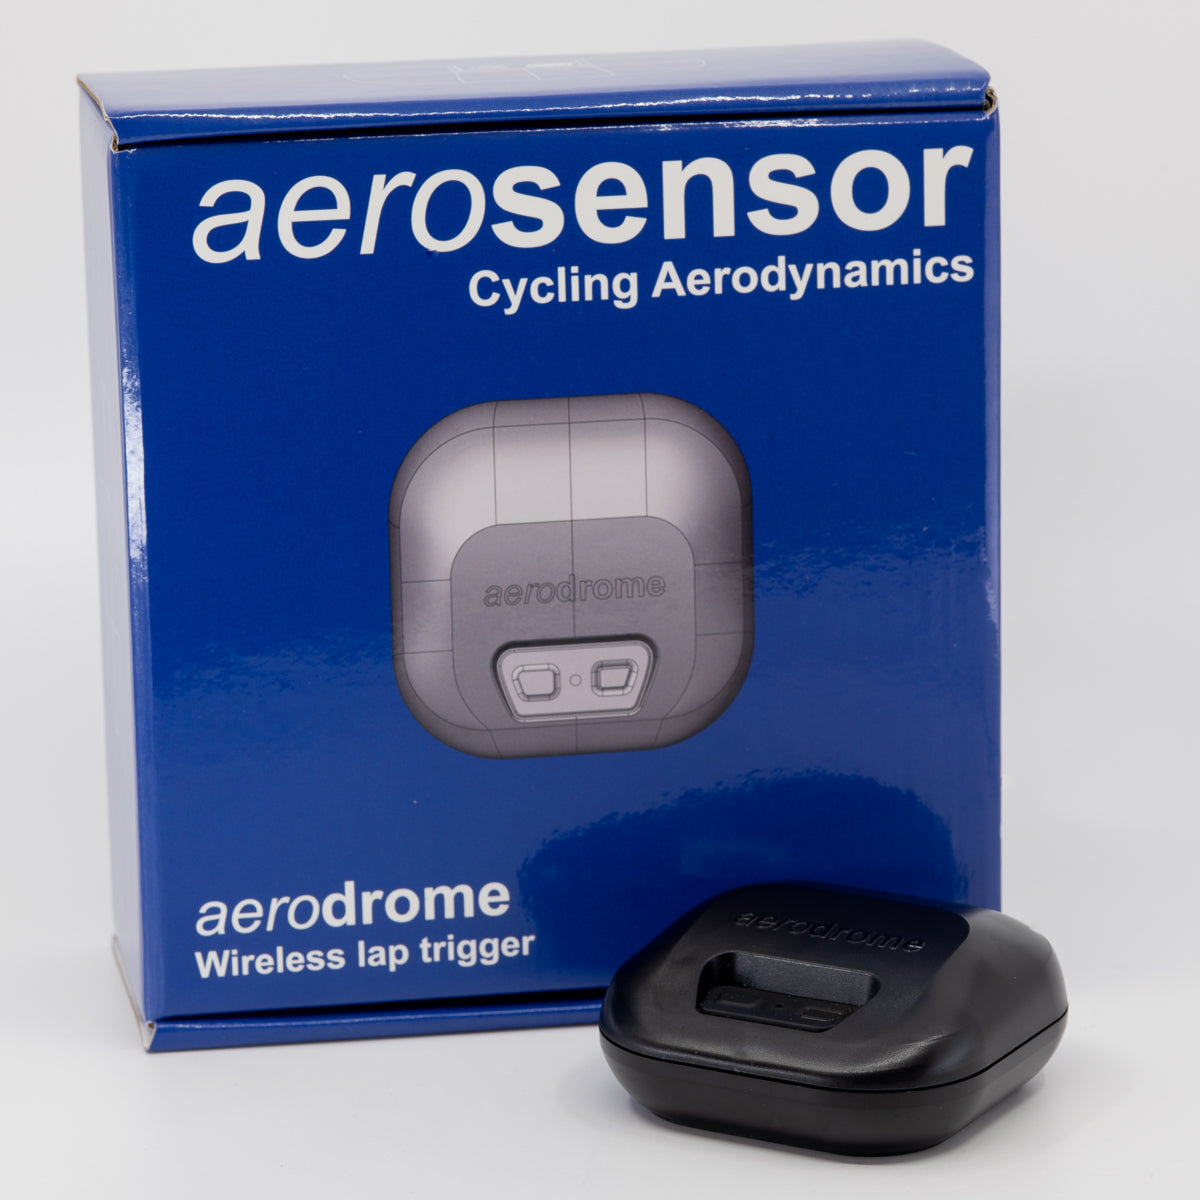 aerodrome cycling device with promotional packaging